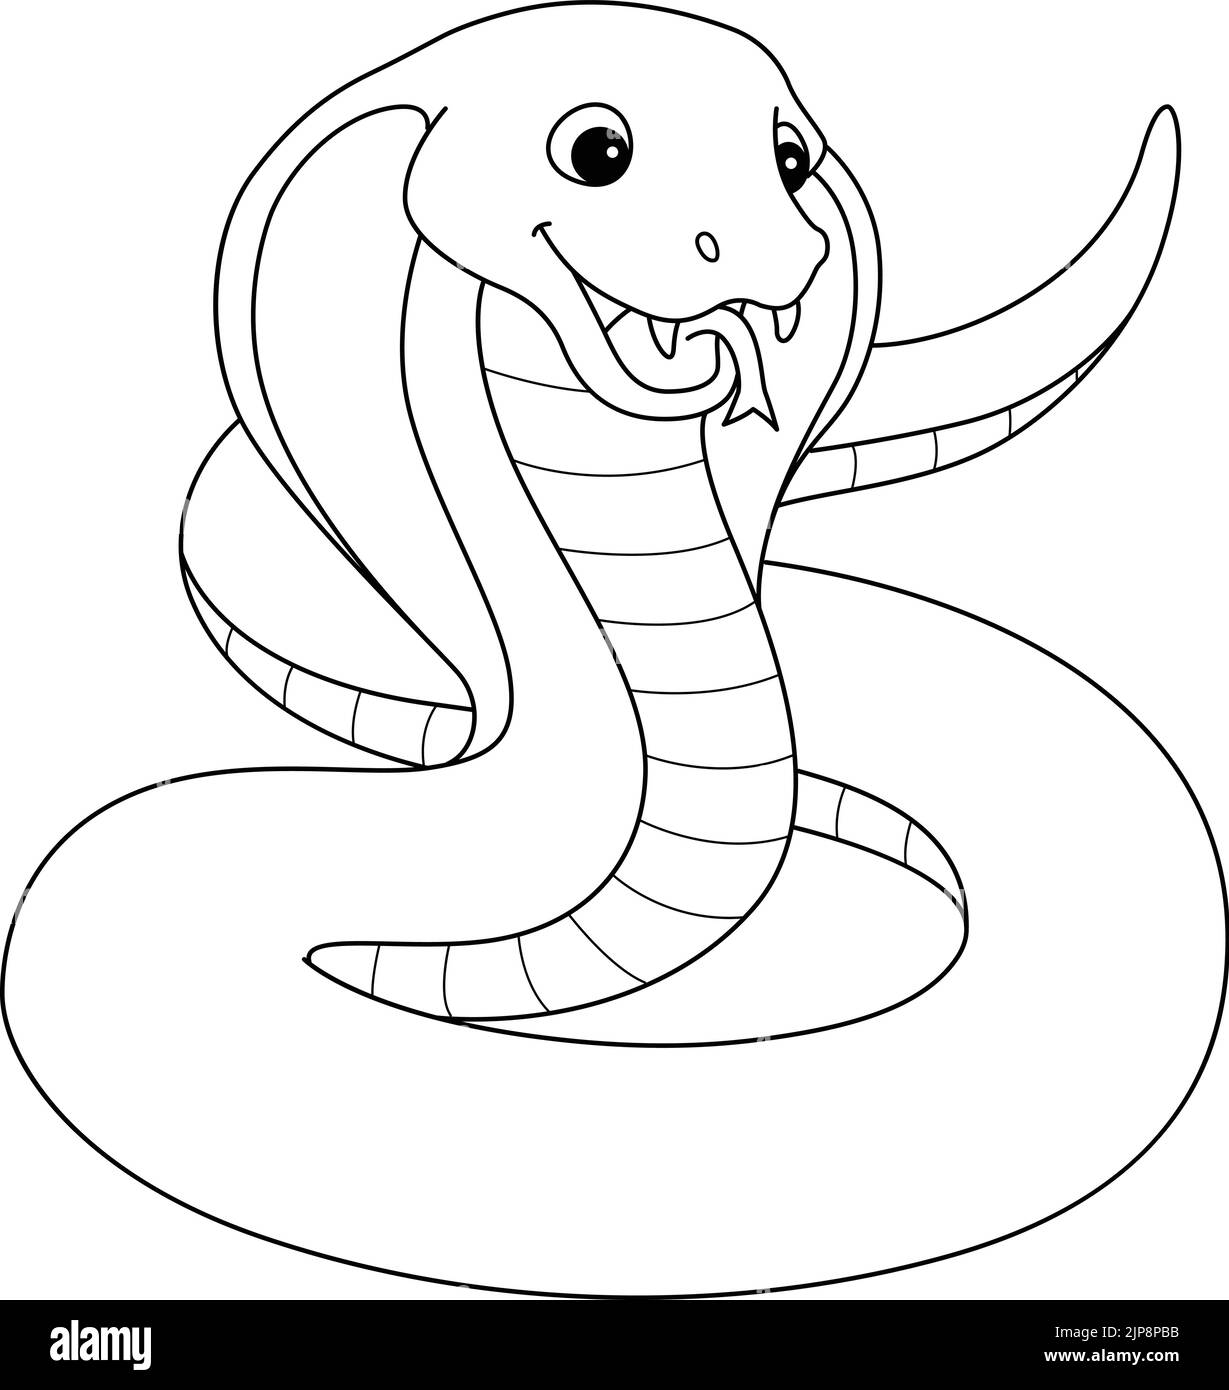 Cobra Animal Isolated Coloring Page for Kids Stock Vector